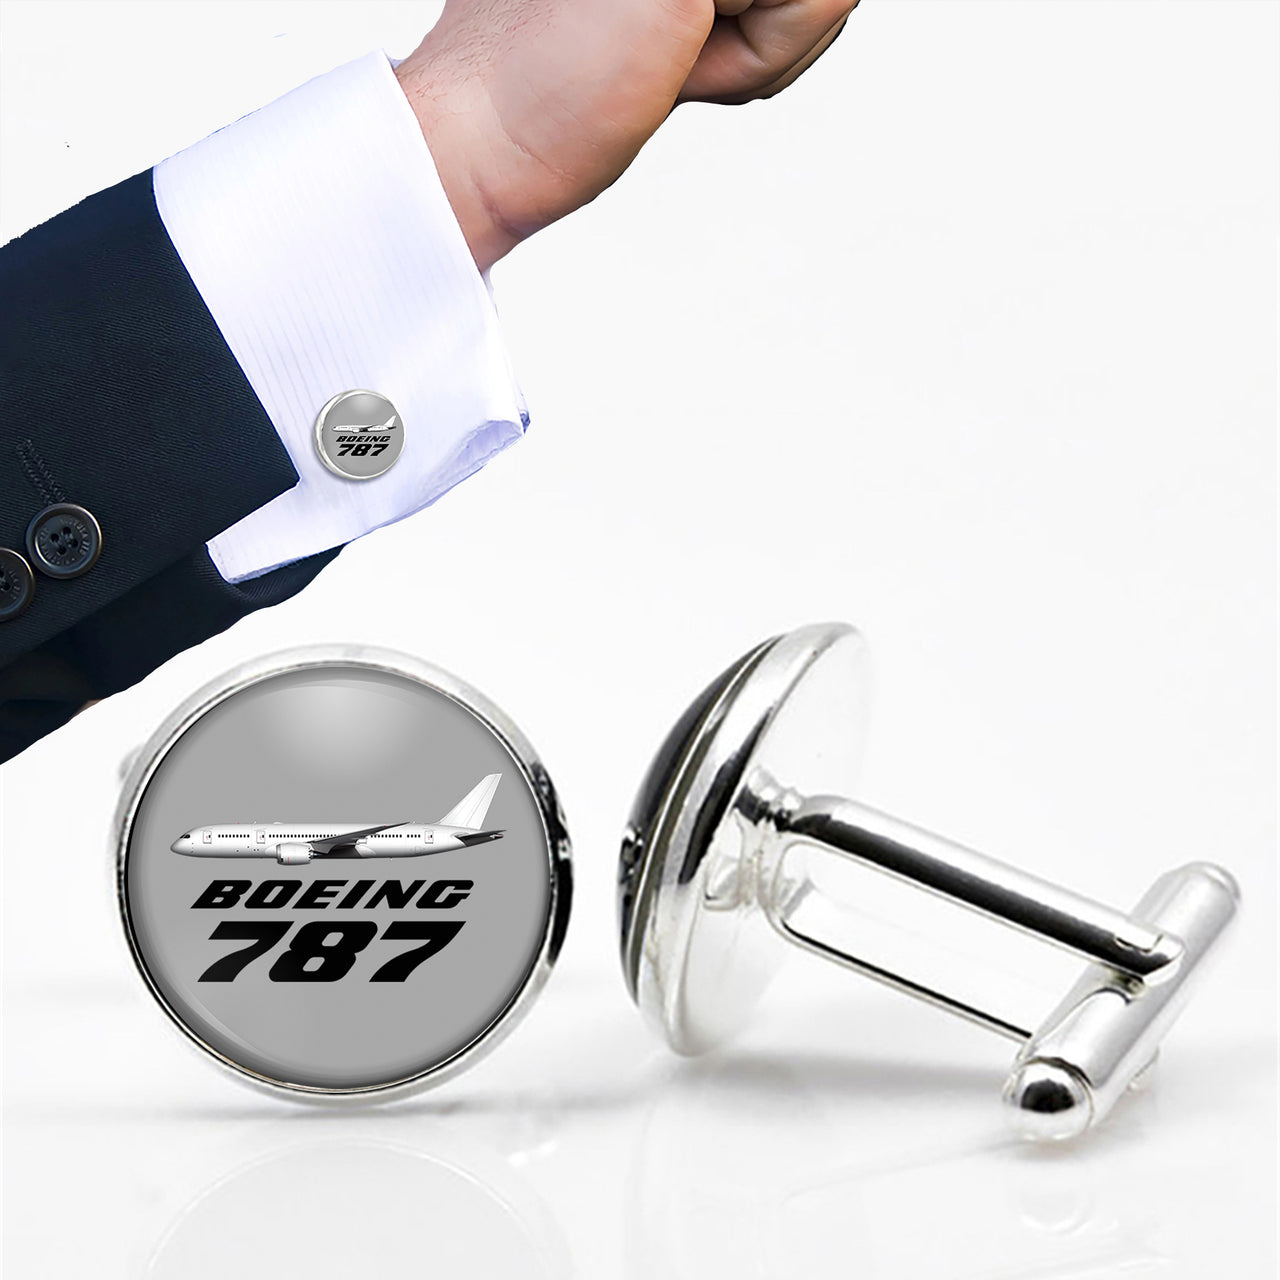 The Boeing 787 Designed Cuff Links